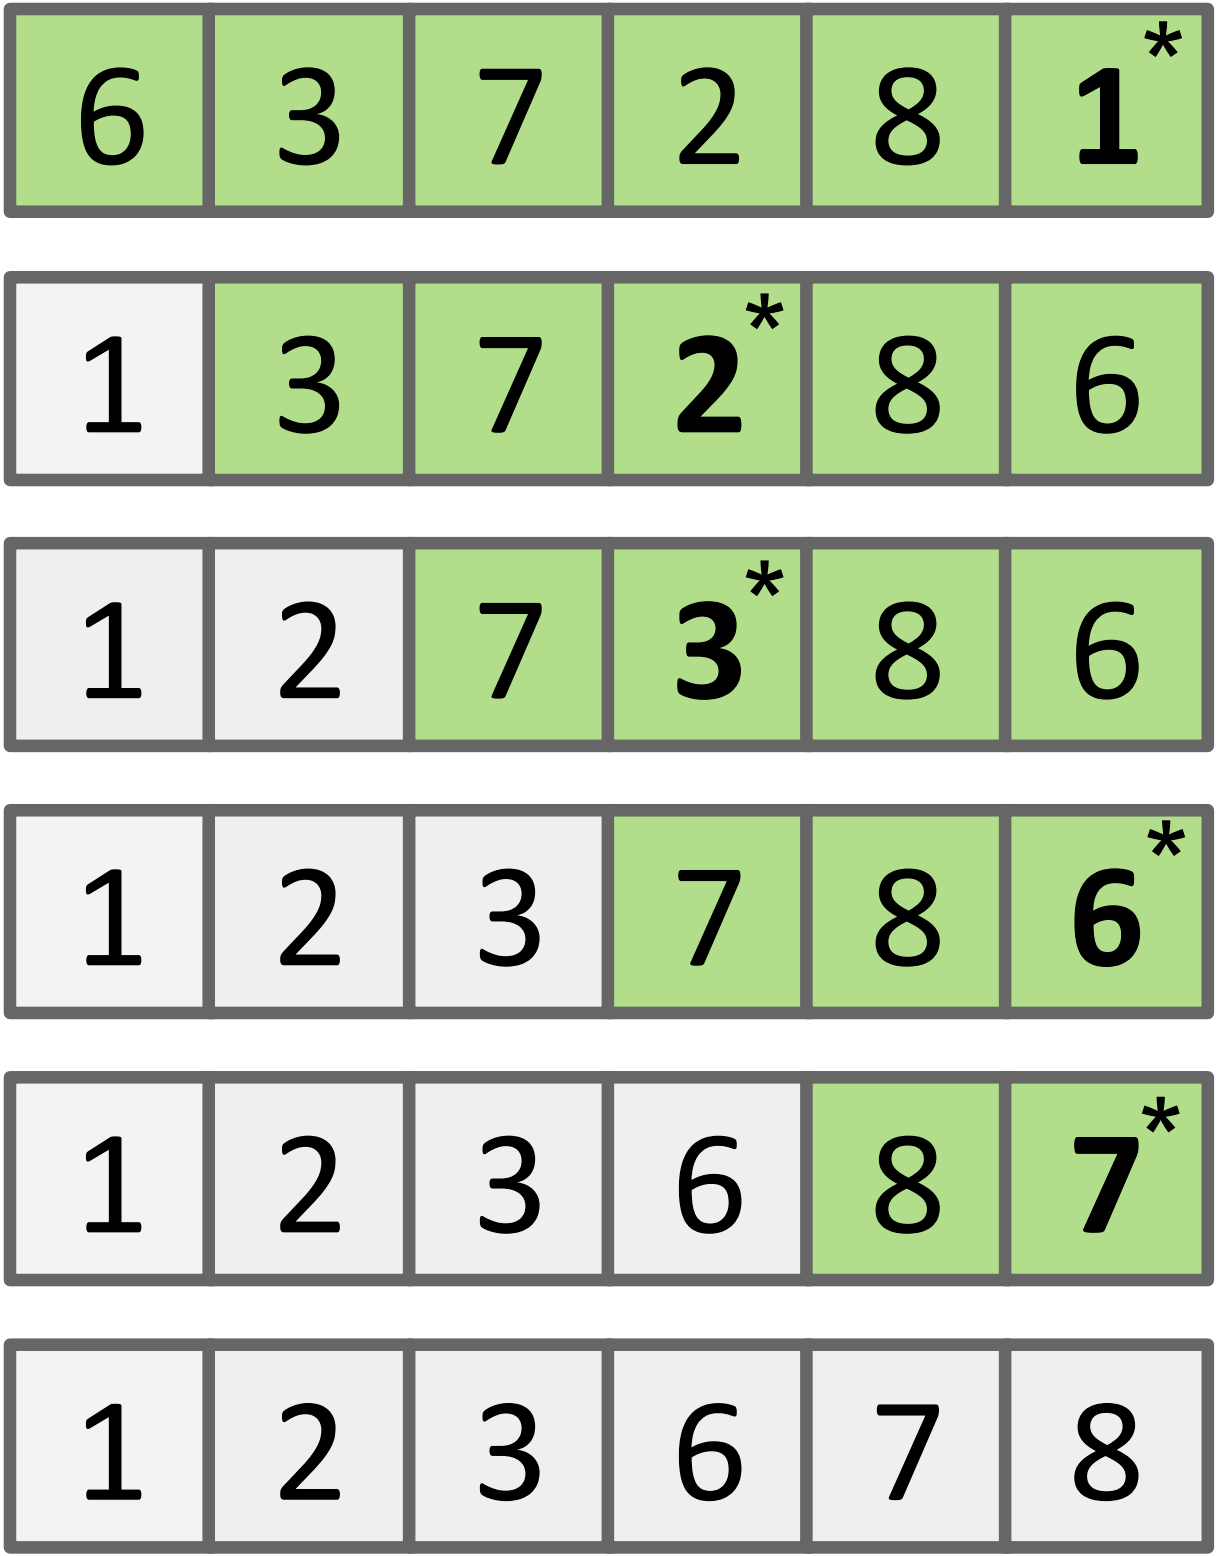 Selection Sort Example